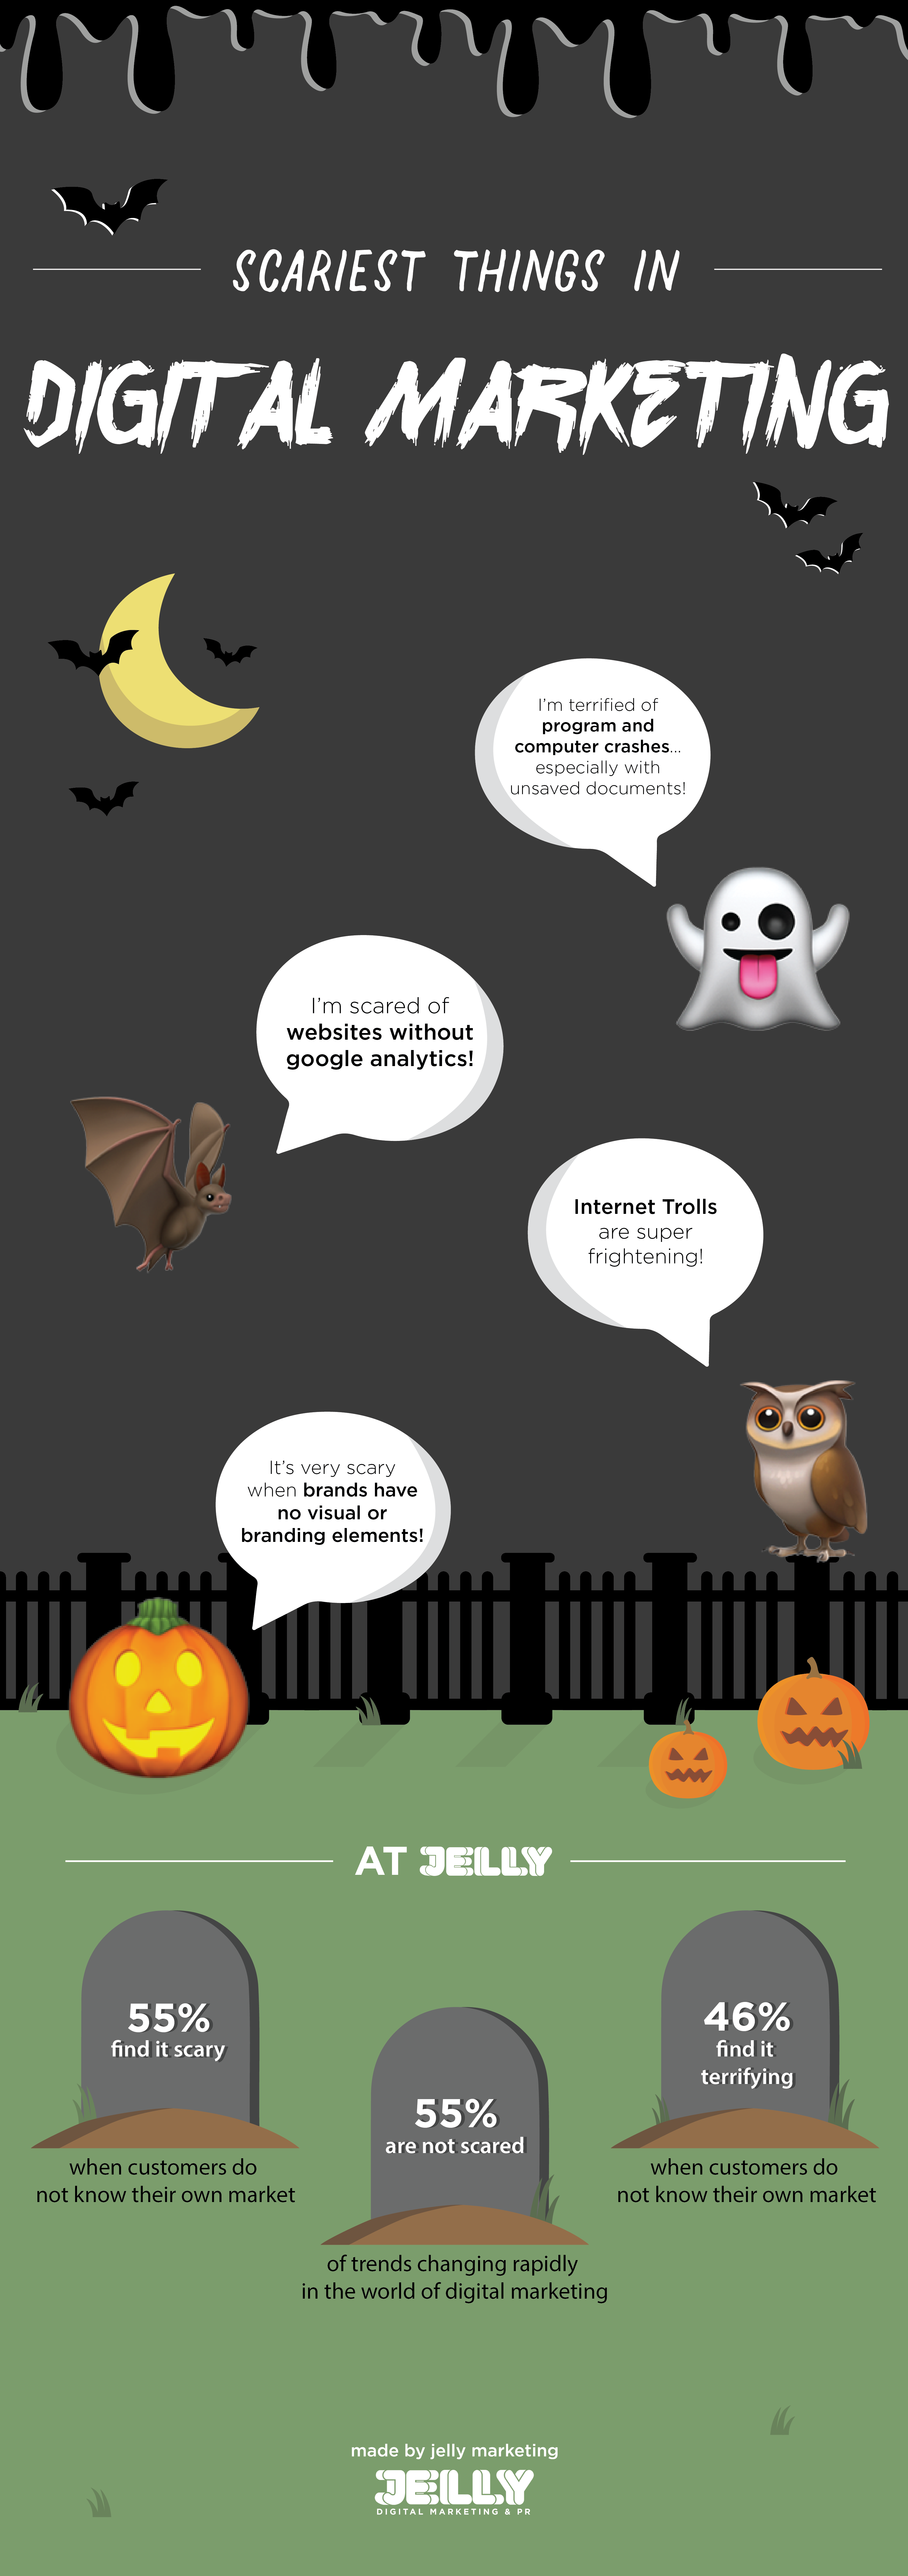 infographic of all the scariest things that can happen in digital marketing